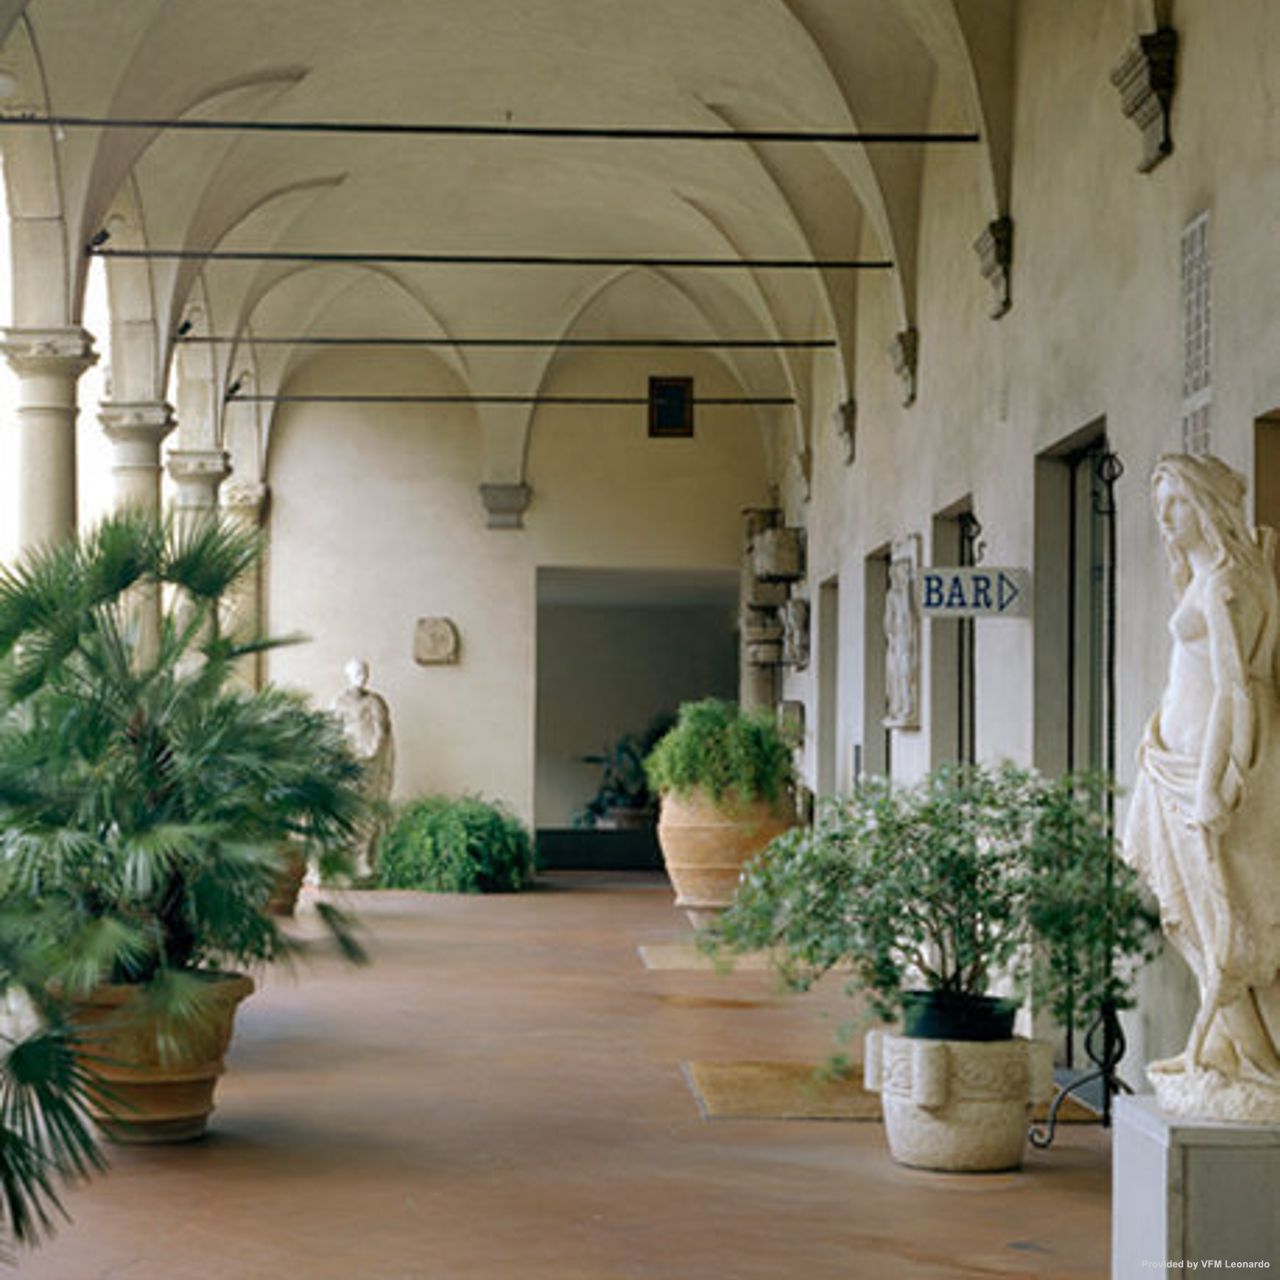 Palazzo Ricasoli Hotel Residence - Florence - Great prices at HOTEL INFO